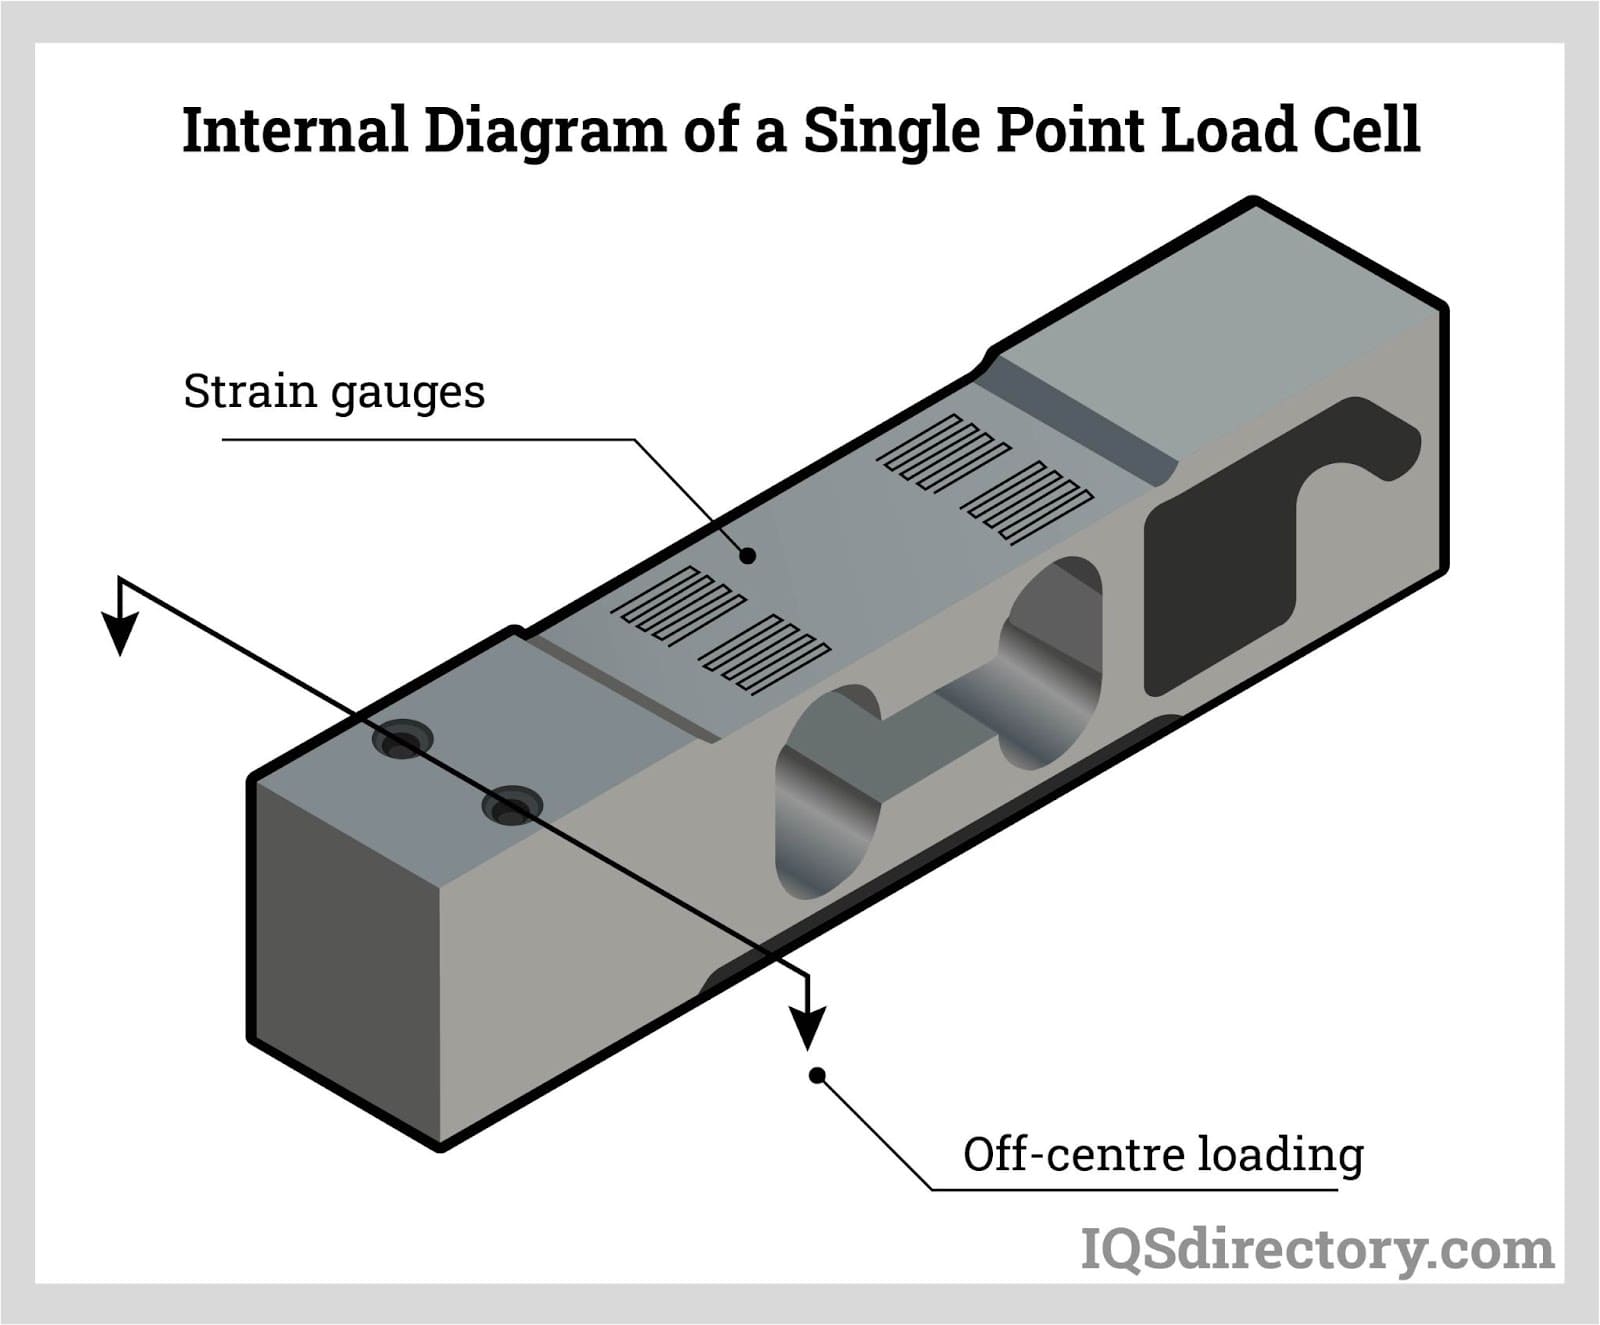 Internal Diagram of a Single Point Load Cell